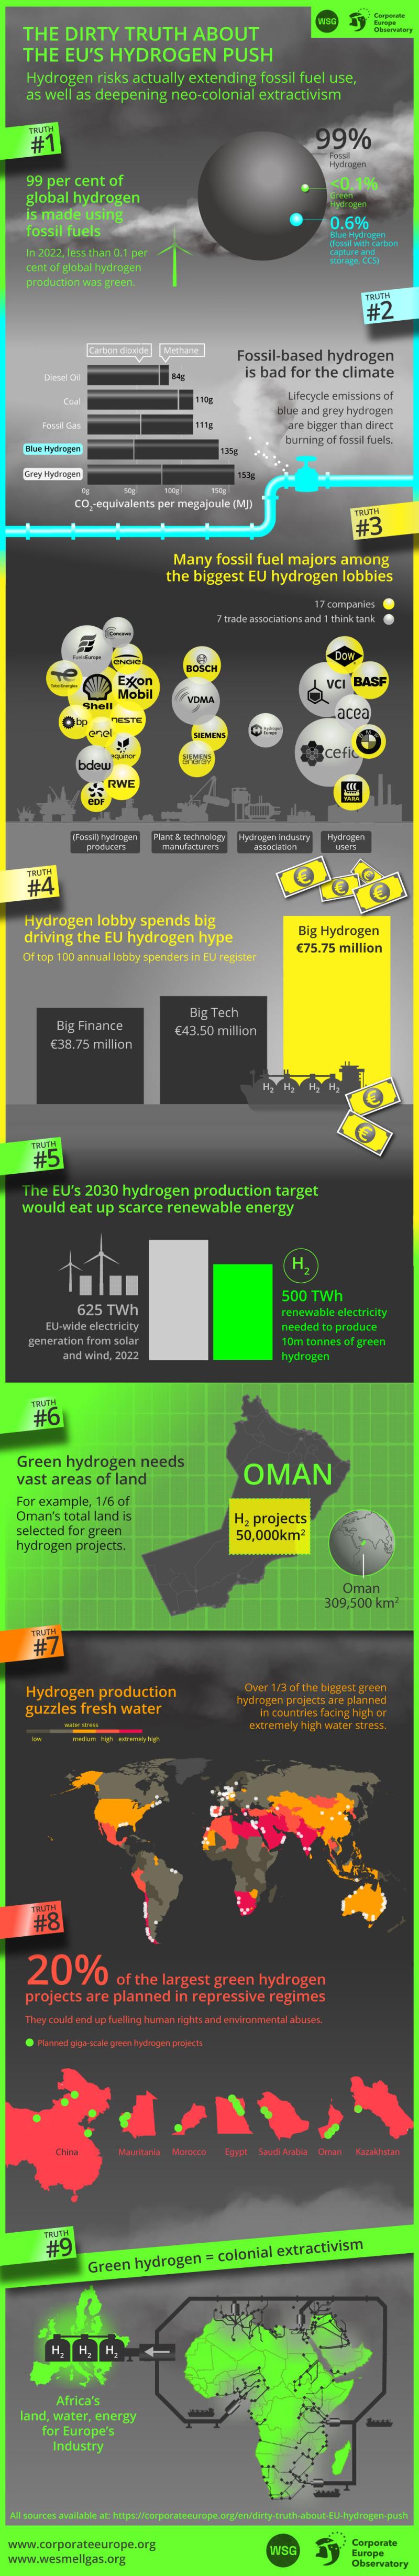 Long infographic into the dirty truth about the EU’s hydrogen push